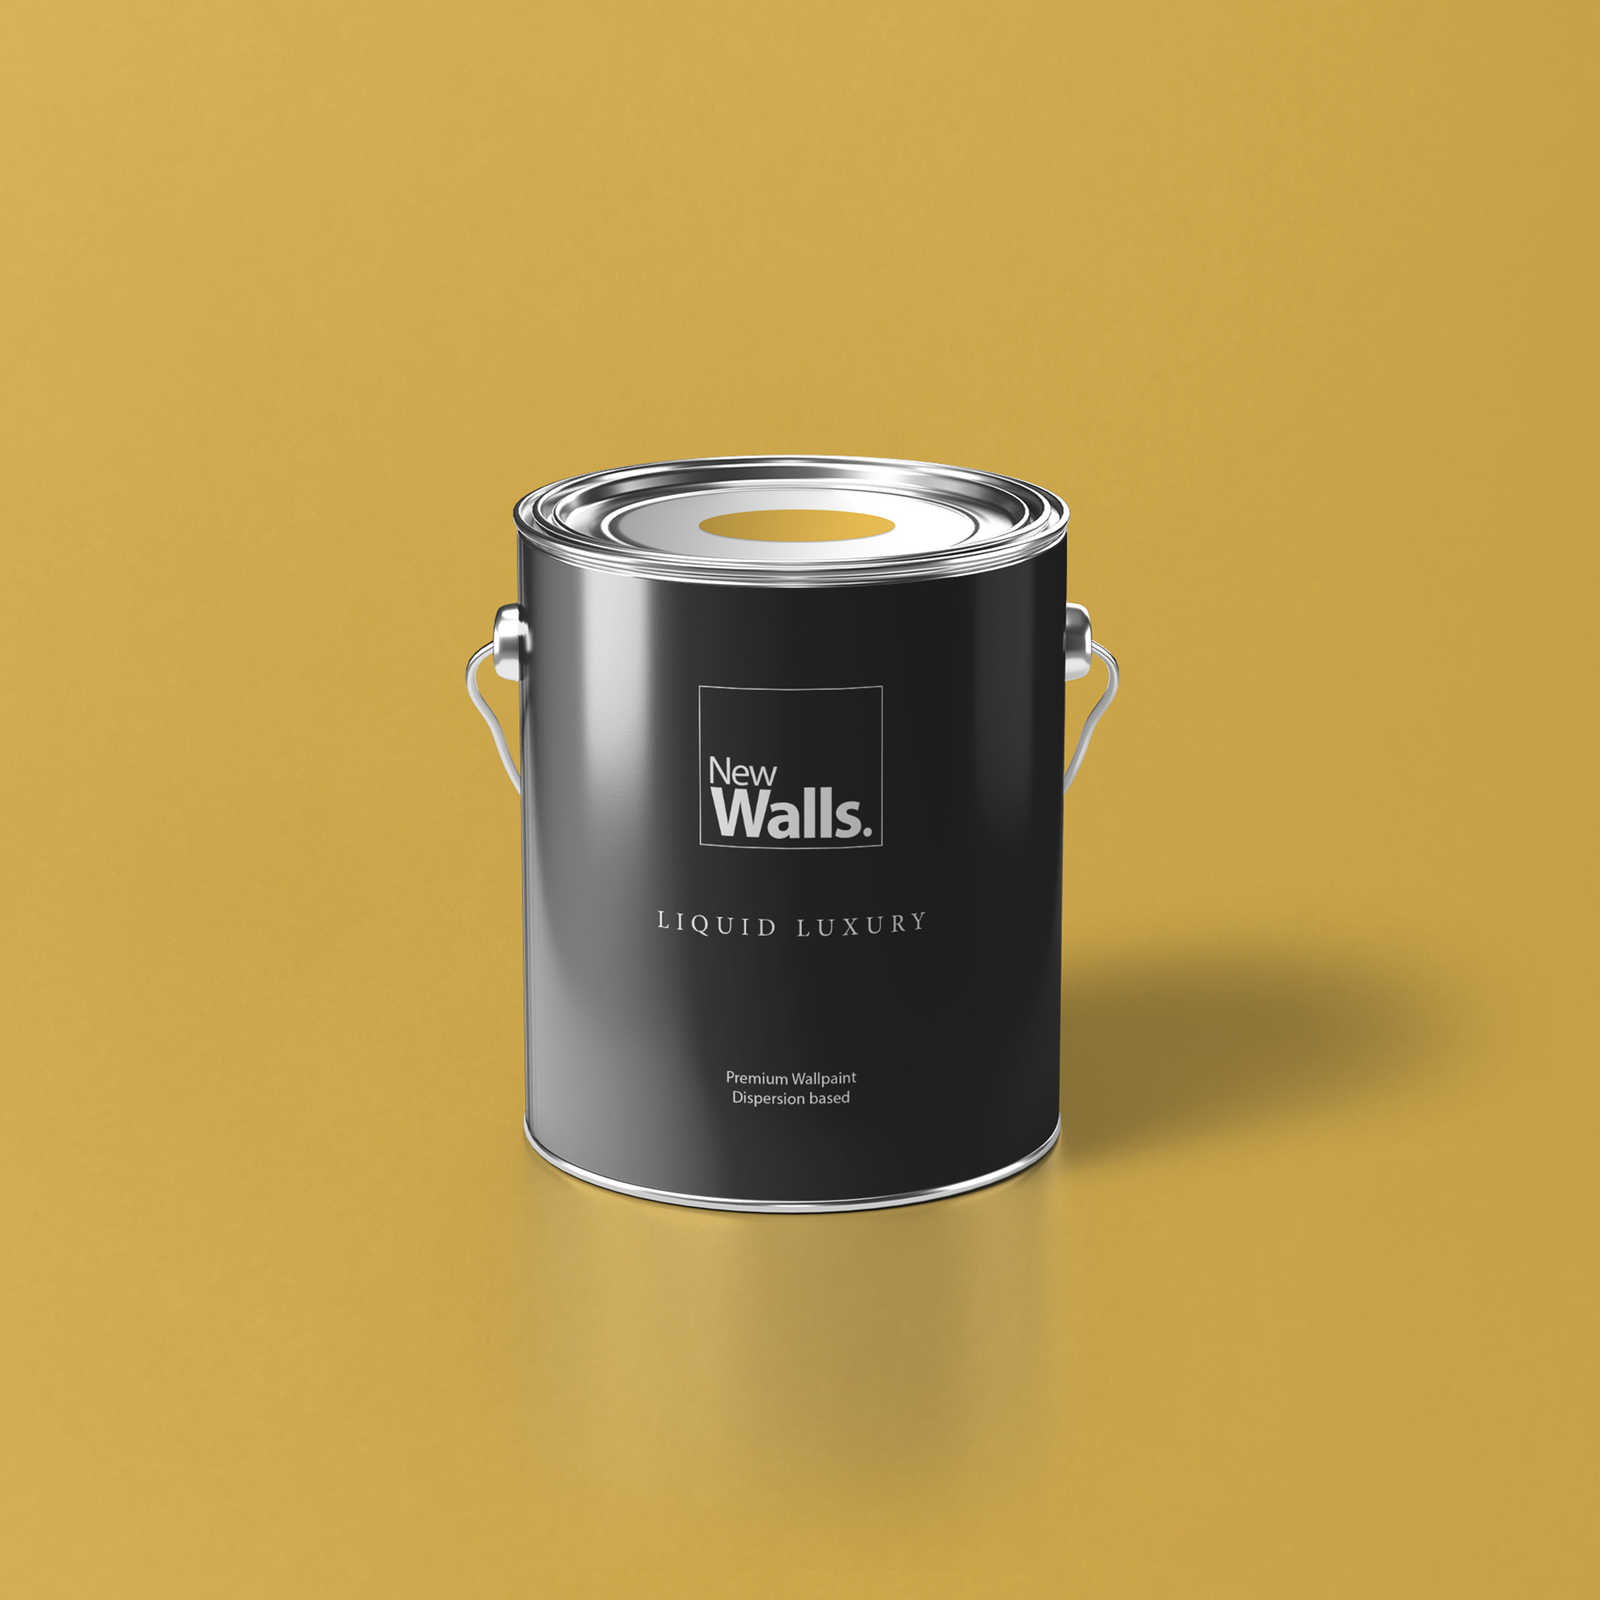 Premium Wall Paint Radiant Mustard Yellow »Juicy Yellow« NW802 – 2.5 litre
